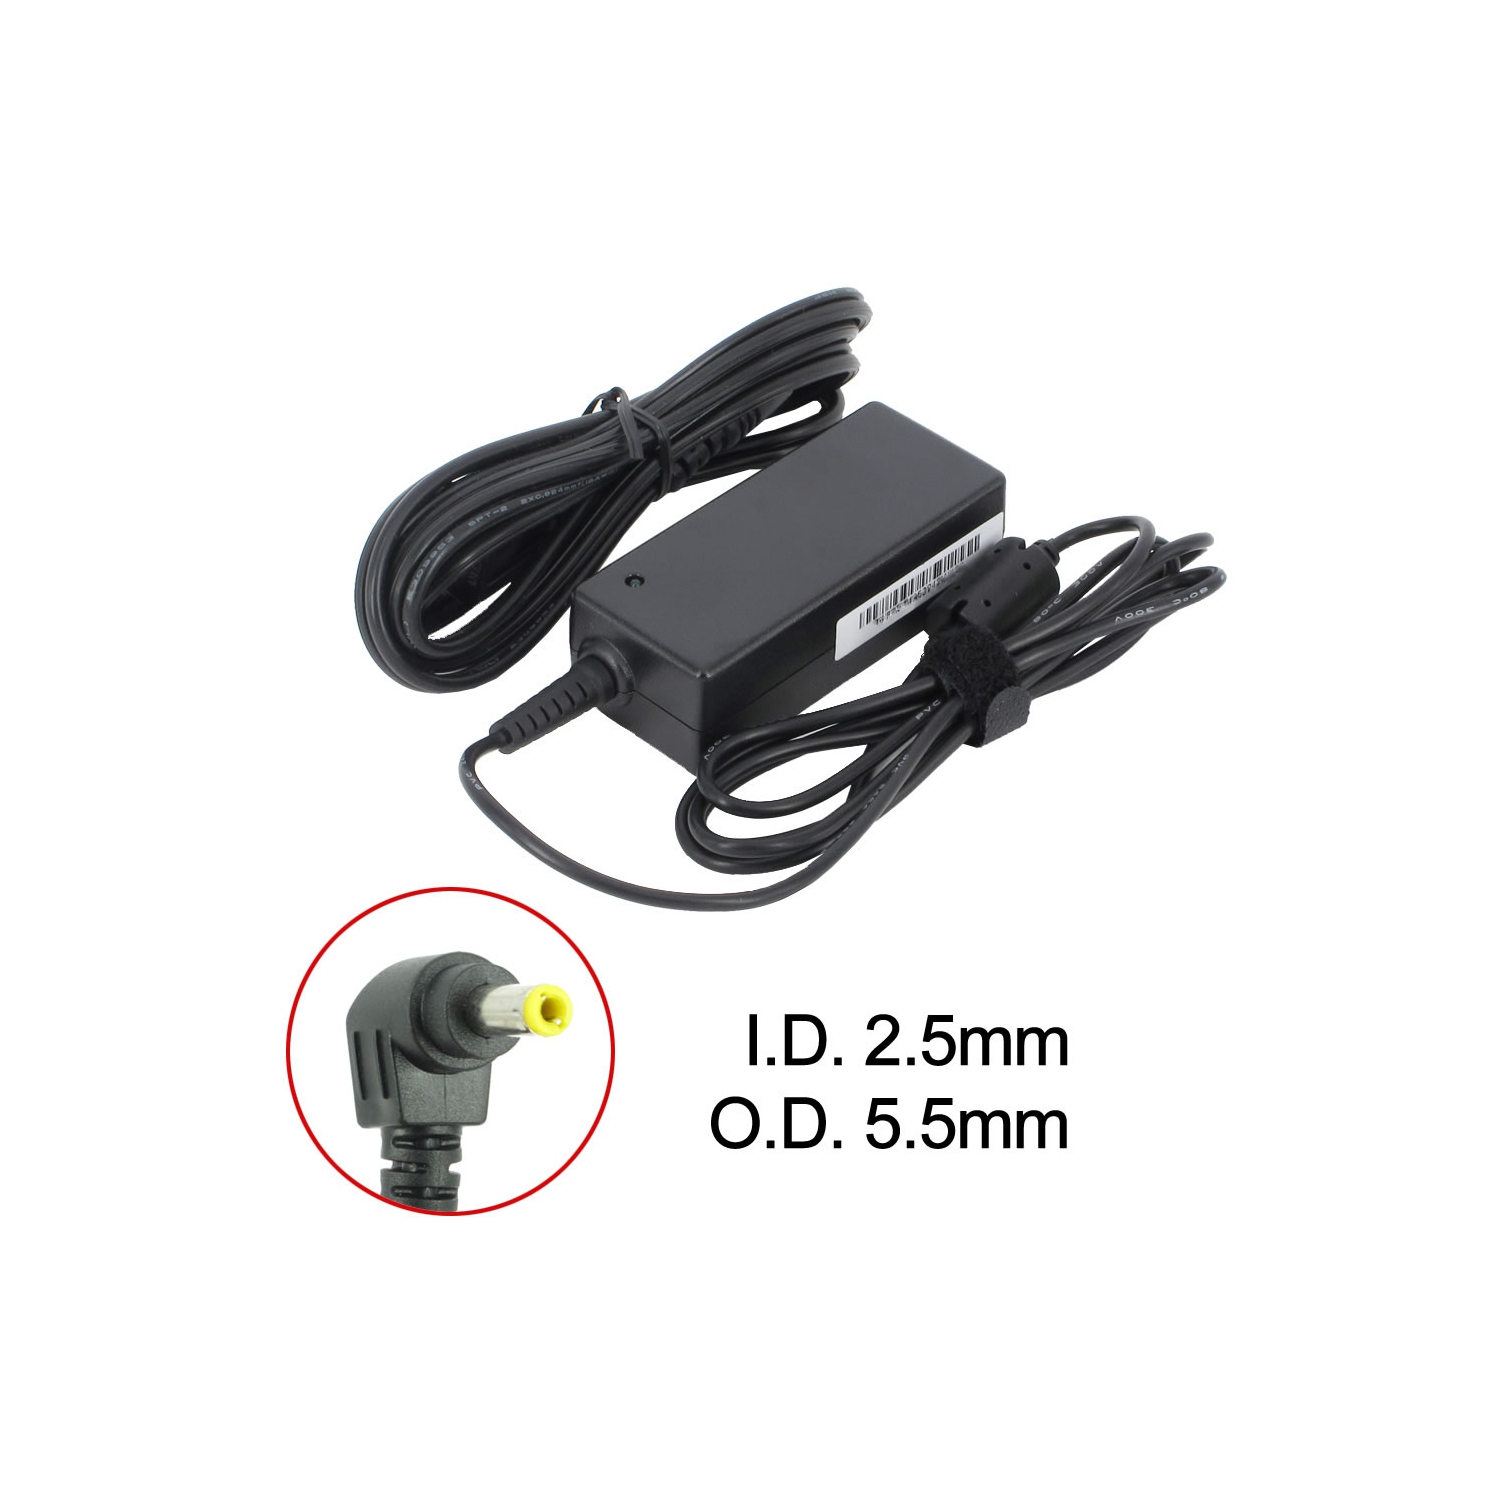 BattDepot: New Laptop AC Adapter for Lenovo 41R4451, ADP-40NH B, 31038046, 41R4447, 45K2201, 55Y9367, 57Y6367